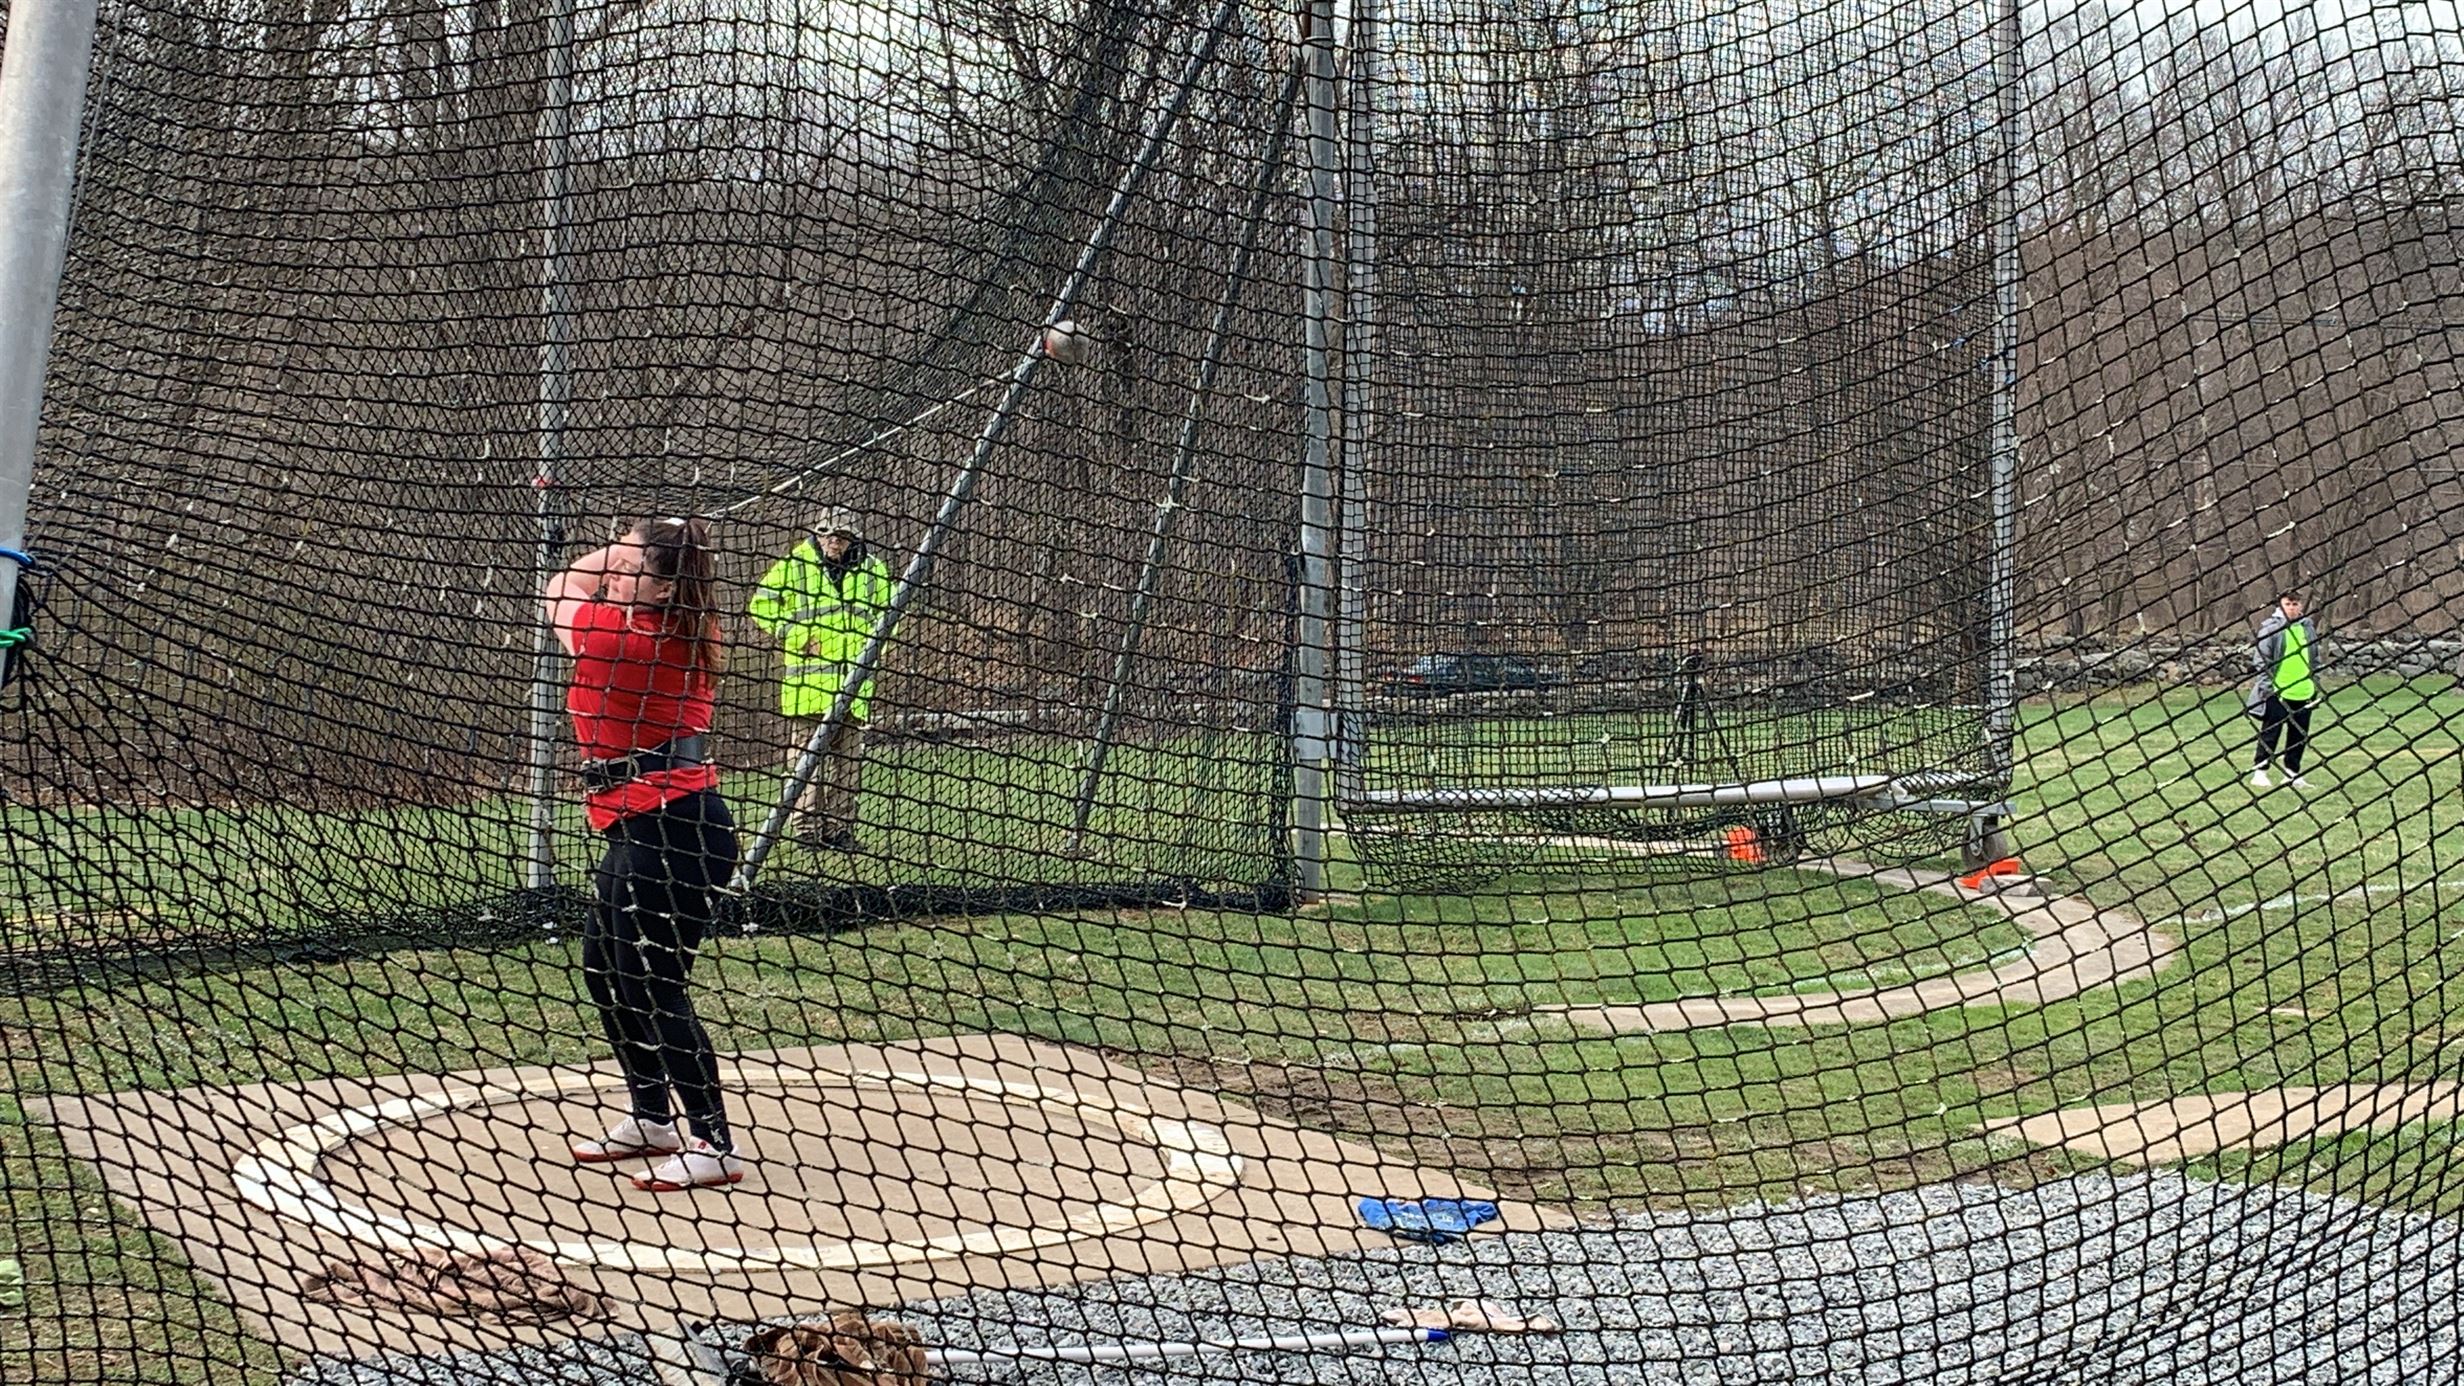 Mastroianni competes in the hammer throw (shown here), discus and shot put. Photo courtesy of Tara Mastroianni